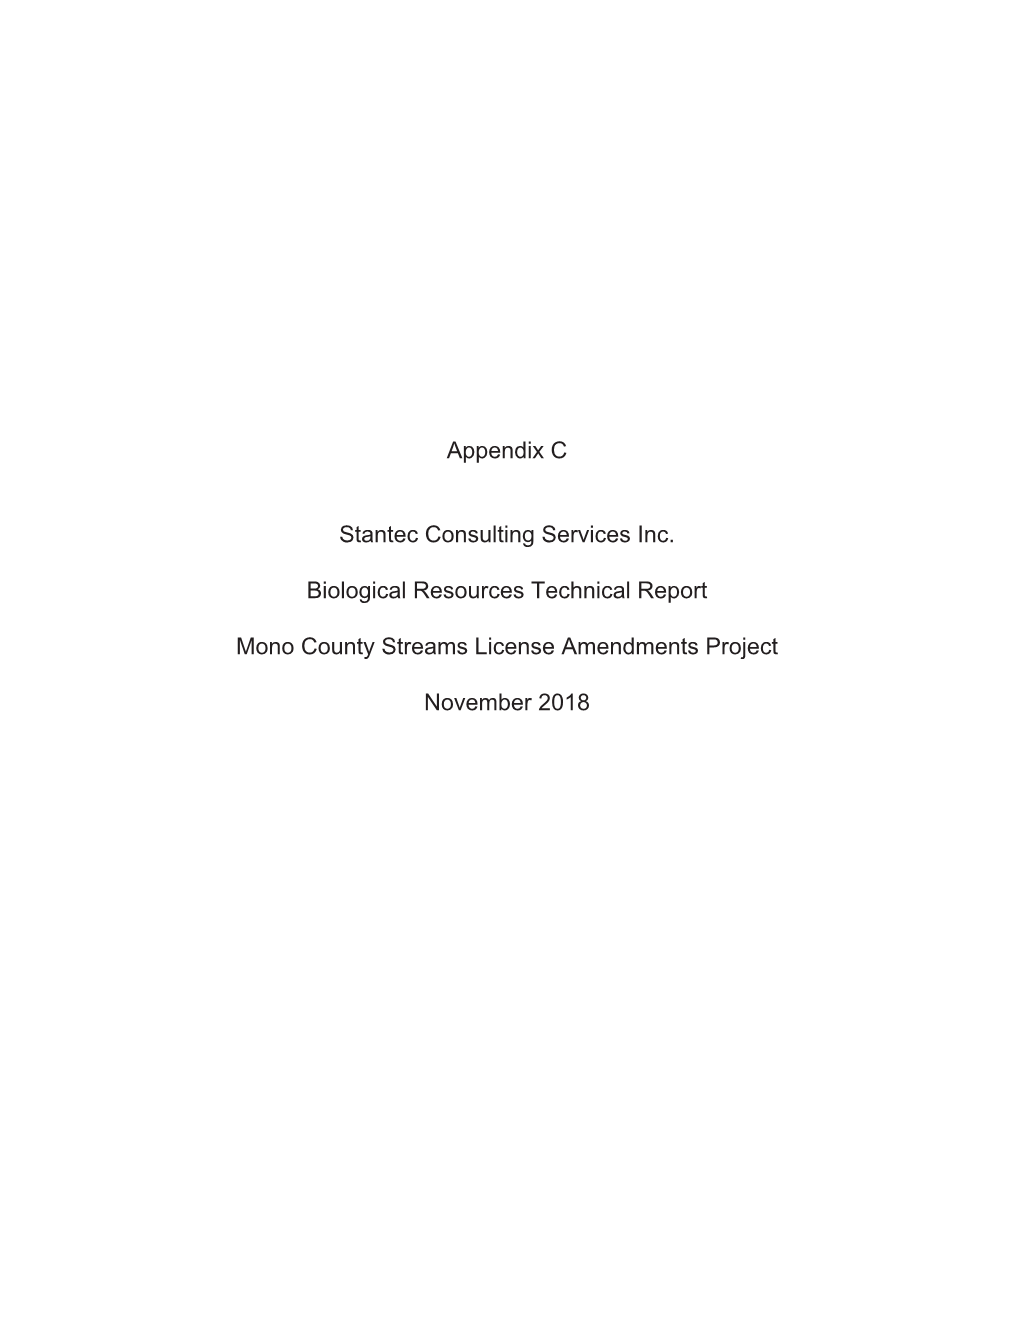 Appendix C Stantec Consulting Services Inc. Biological Resources Technical Report Mono County Streams License Amendments Project